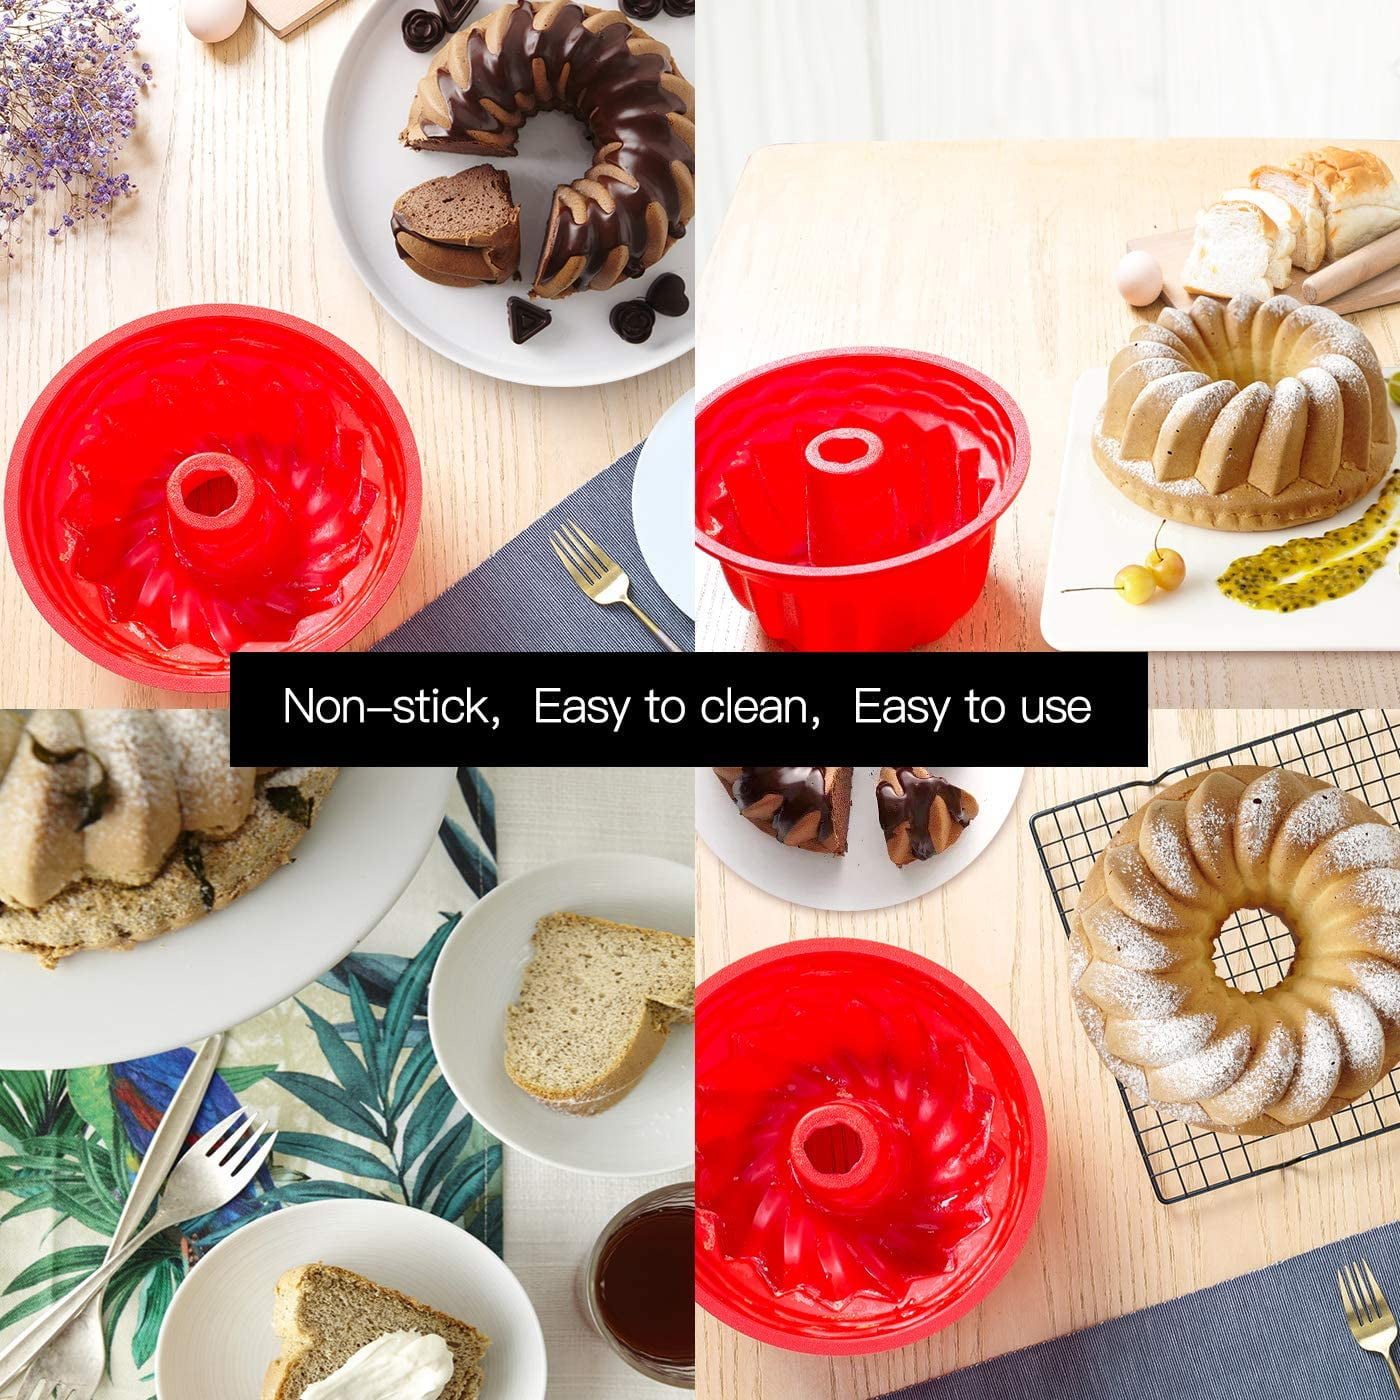 Yule Log Pan Small Cookie Sheets 7x9 Molds Tools Molds Epoxy Baking Valentine's Day Silicone Biscuits Molds Molds Candle Cake Molds Cake Mould Baking